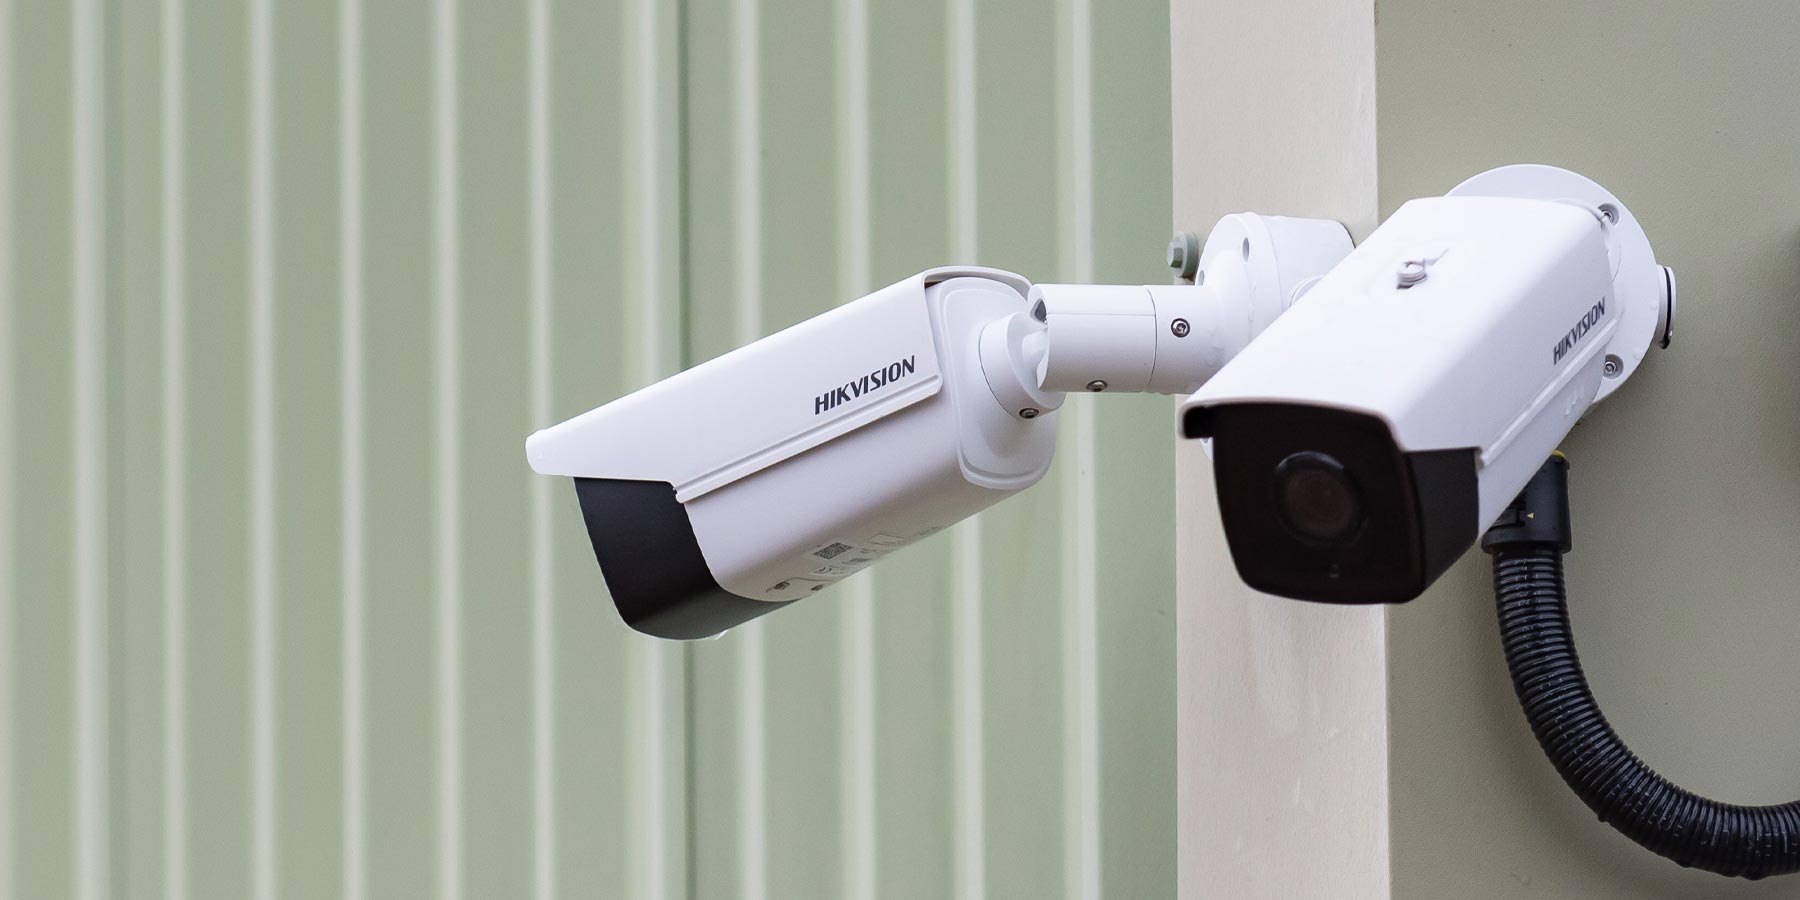 CCTV & SECURITY SYSTEMS